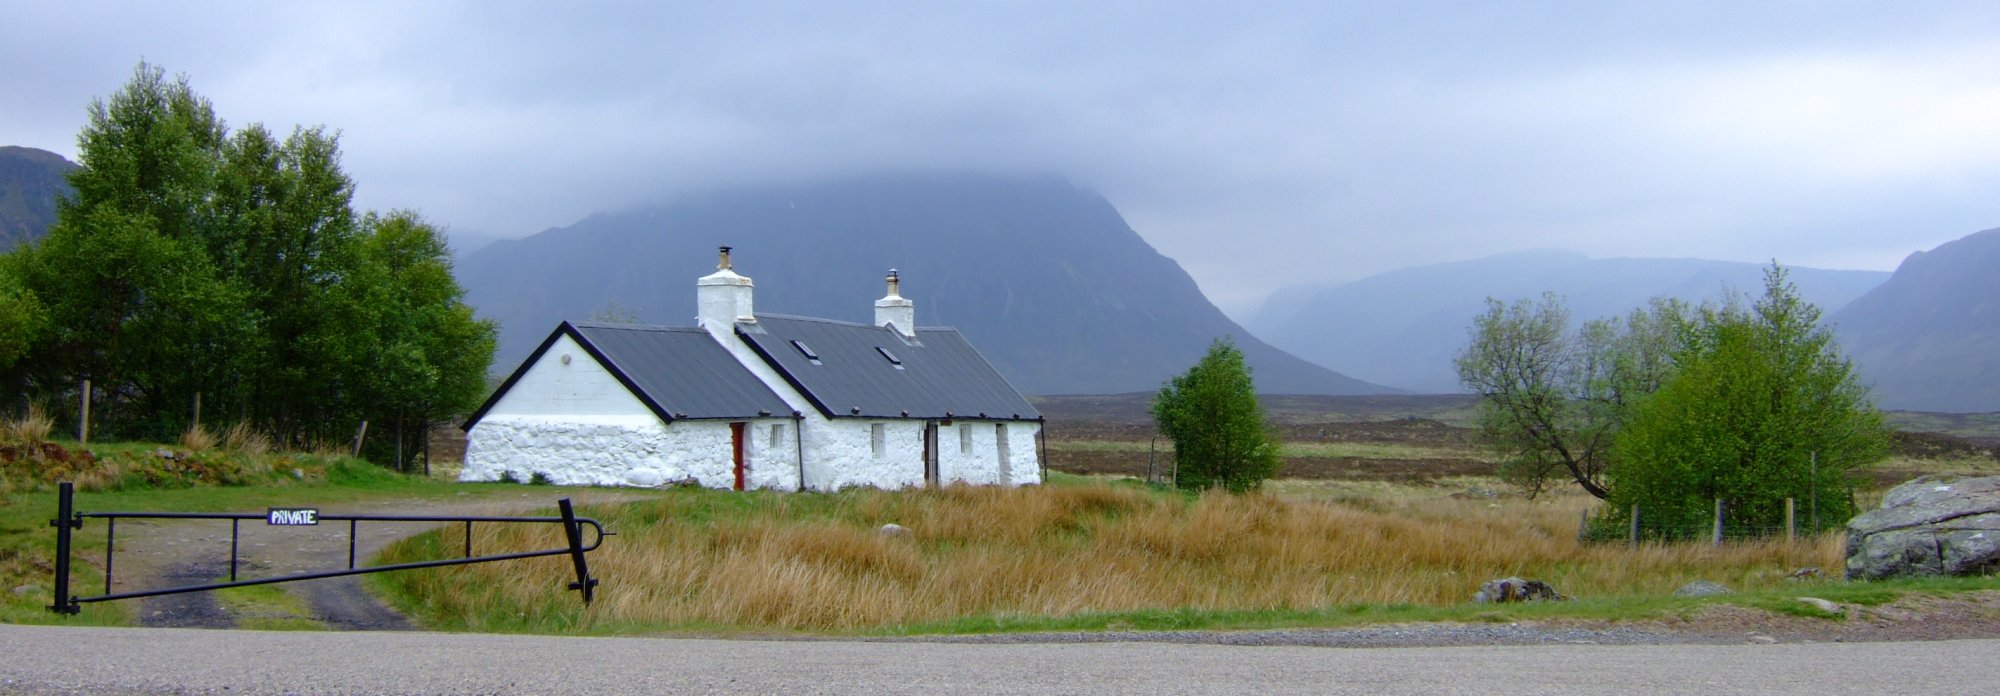 Every WHW journal has to have a picture of Blackrock Cottage - it's compulsory isn't it?